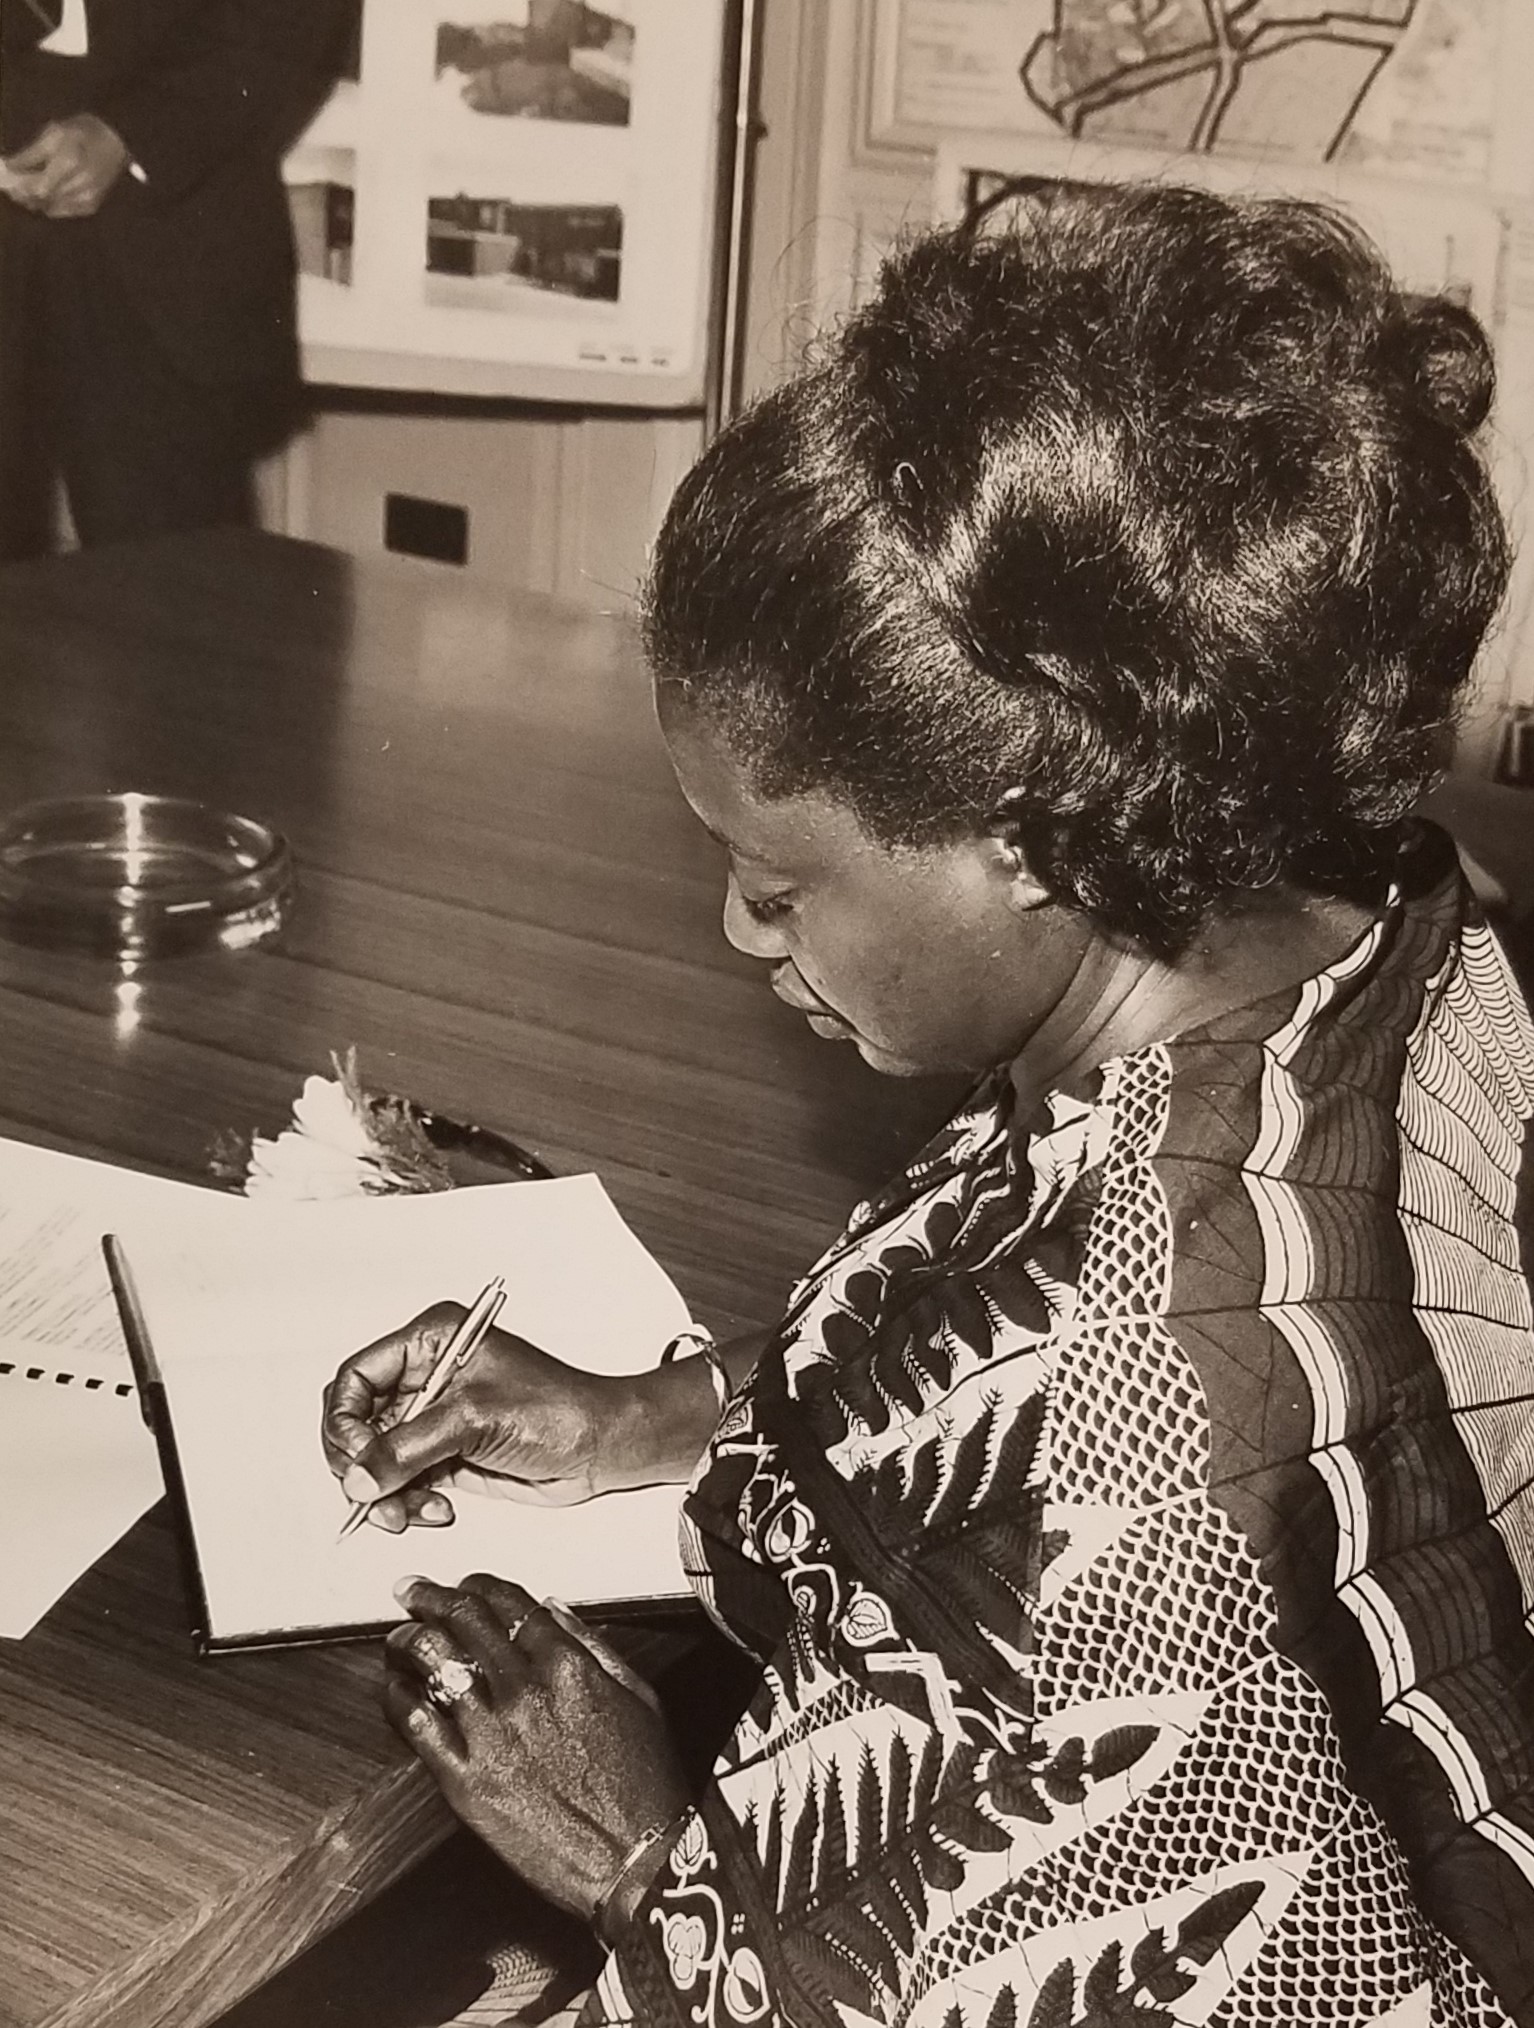 Victoria Poku, wife of Otomfuo Opoku Ware II. Signing Redditch Development Corporation visitors' book. Crown Copyright. 